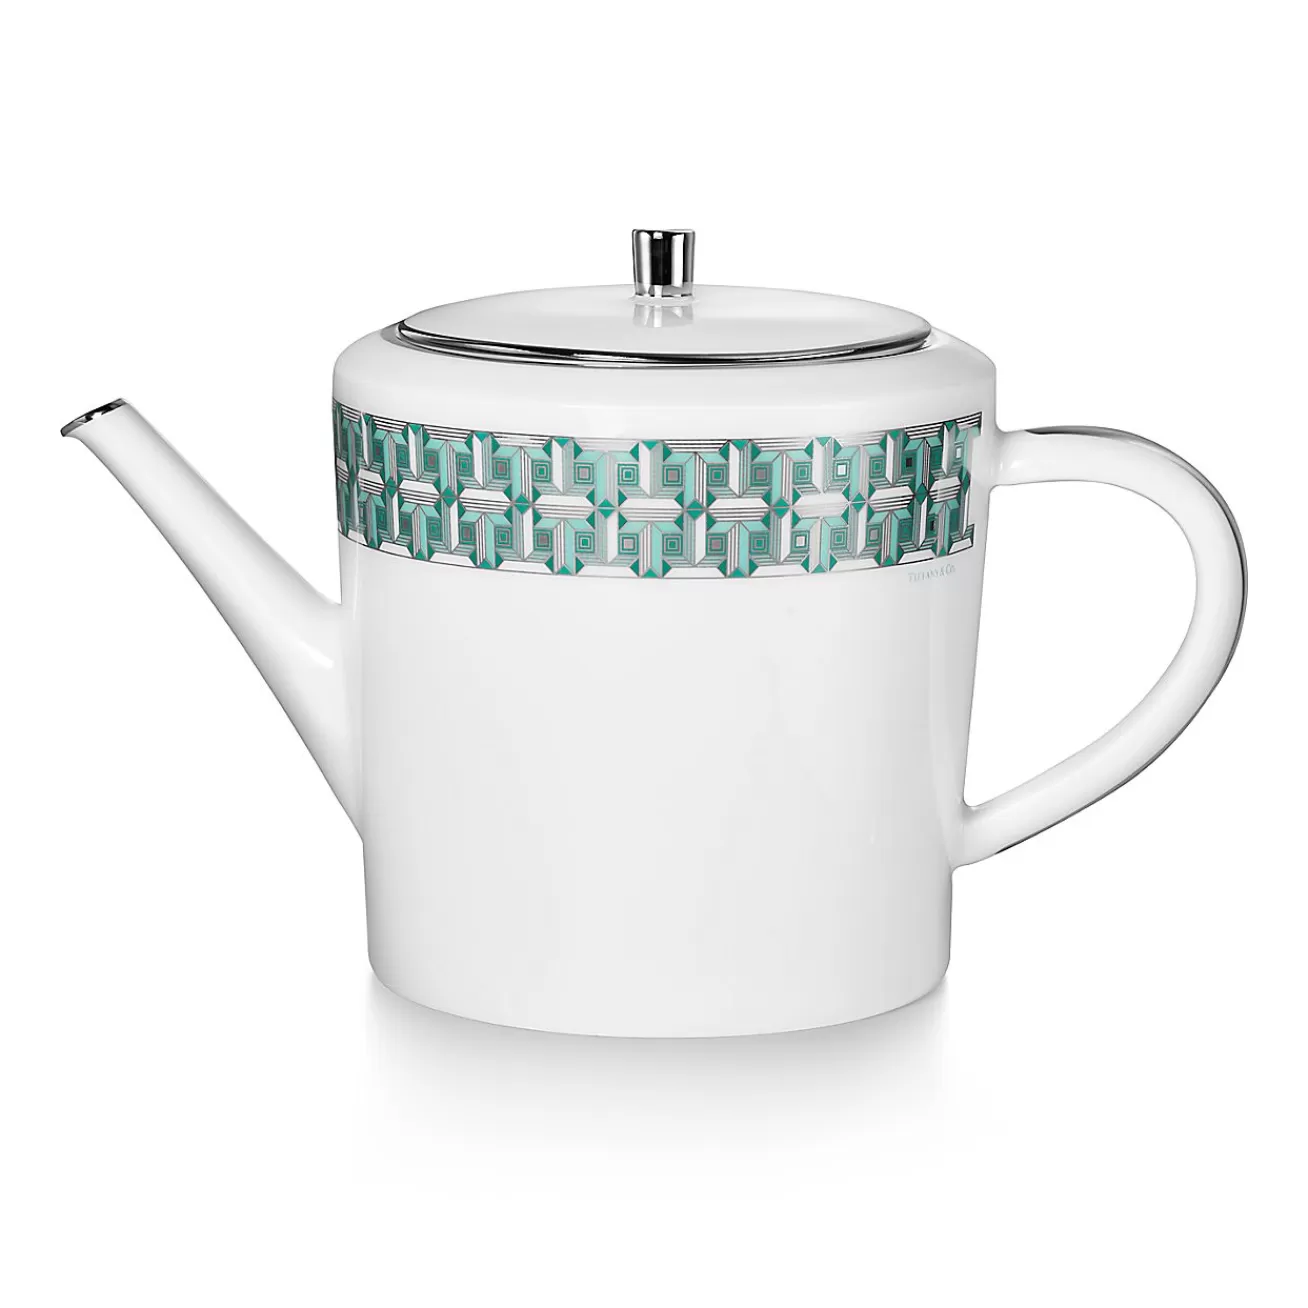 Tiffany & Co. Tiffany Blue Tiffany T True Teapot with a Hand-painted Platinum Rim | ^ The Home | Housewarming Gifts